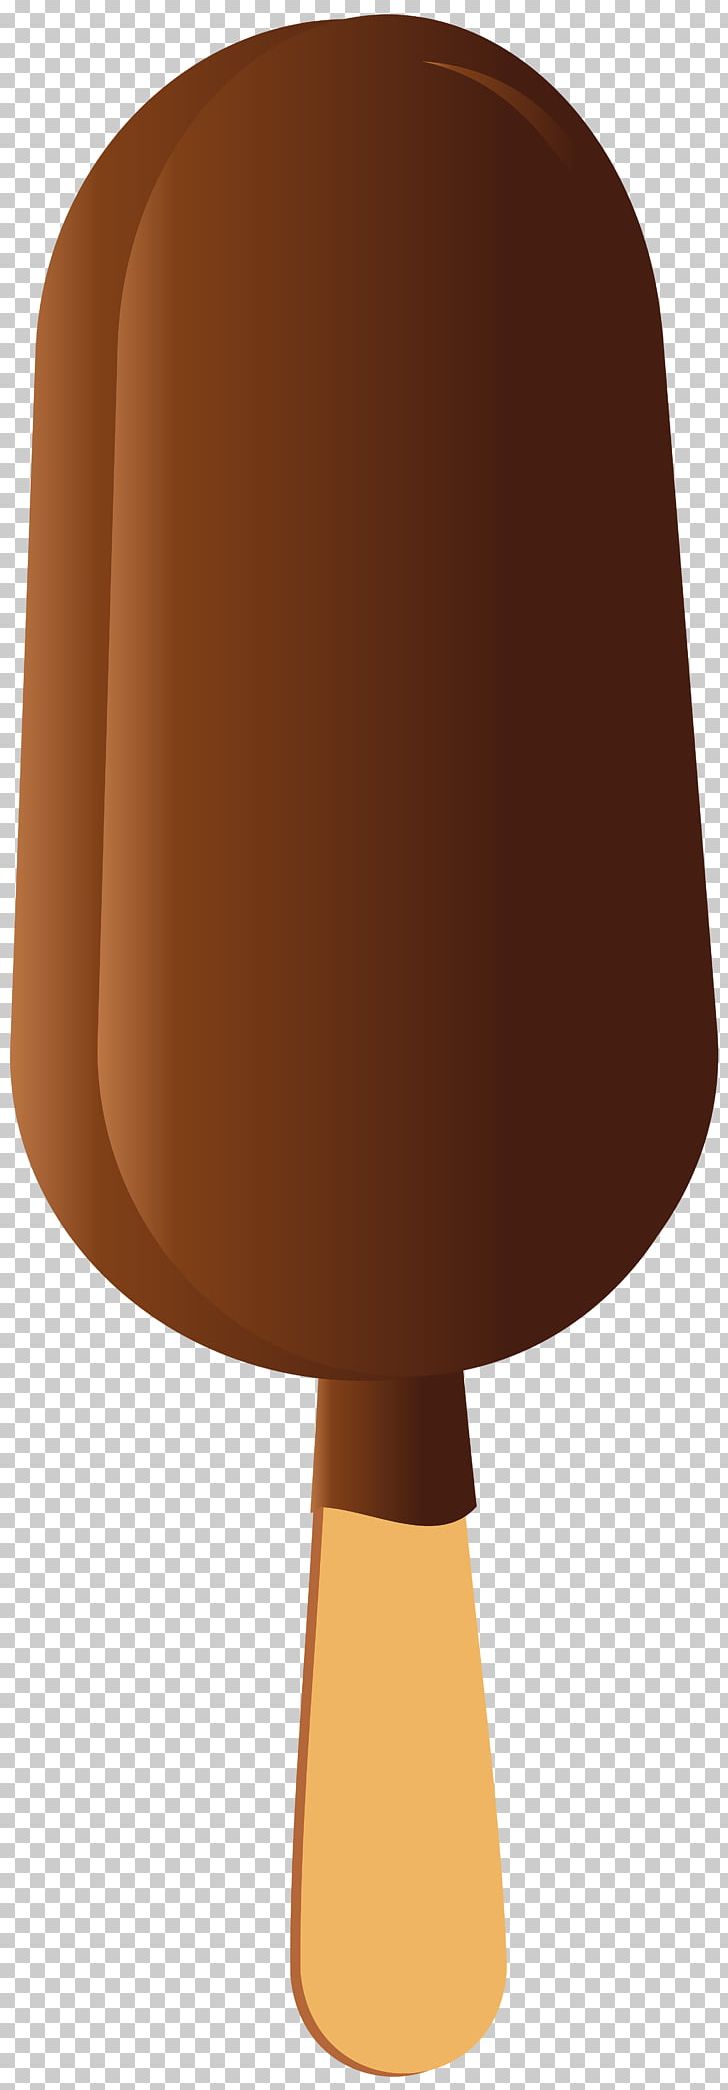 Ice Cream Cones Sundae Ice Pop PNG, Clipart, Angle, Brown, Candy, Cartoon, Chocolate Free PNG Download